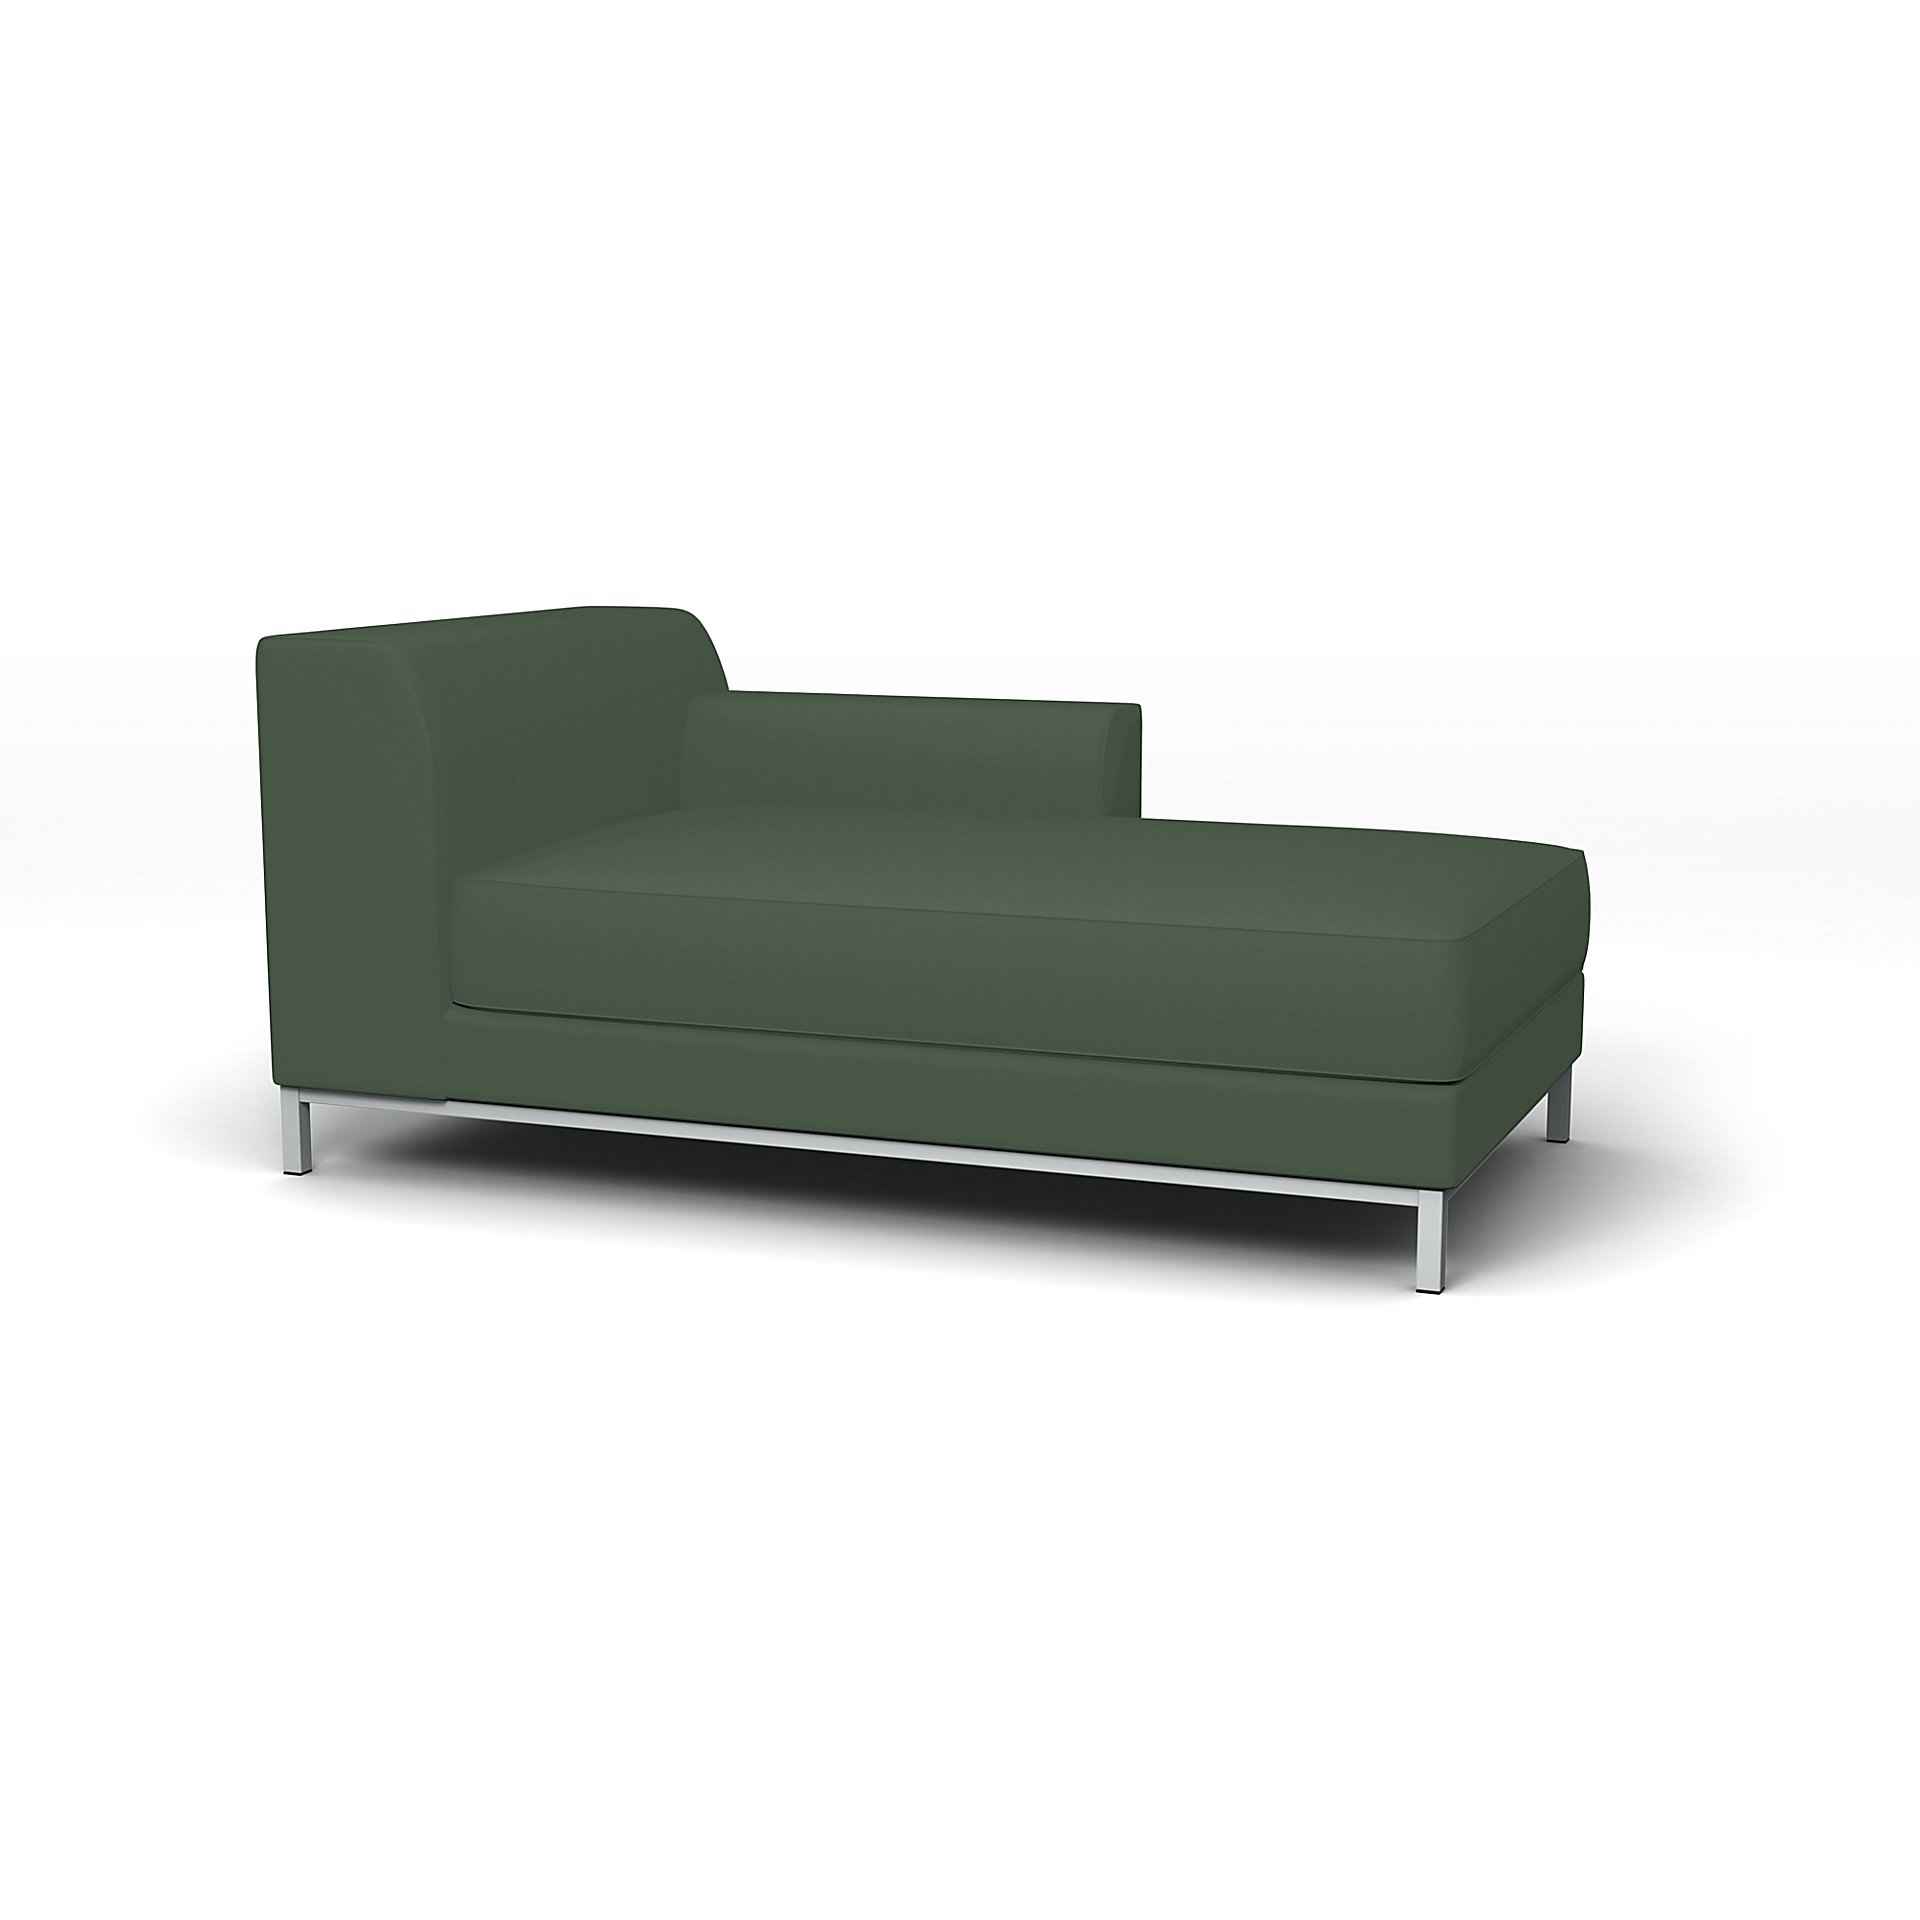 IKEA - Kramfors Chaise Longue with Right Arm Cover, Thyme, Cotton - Bemz